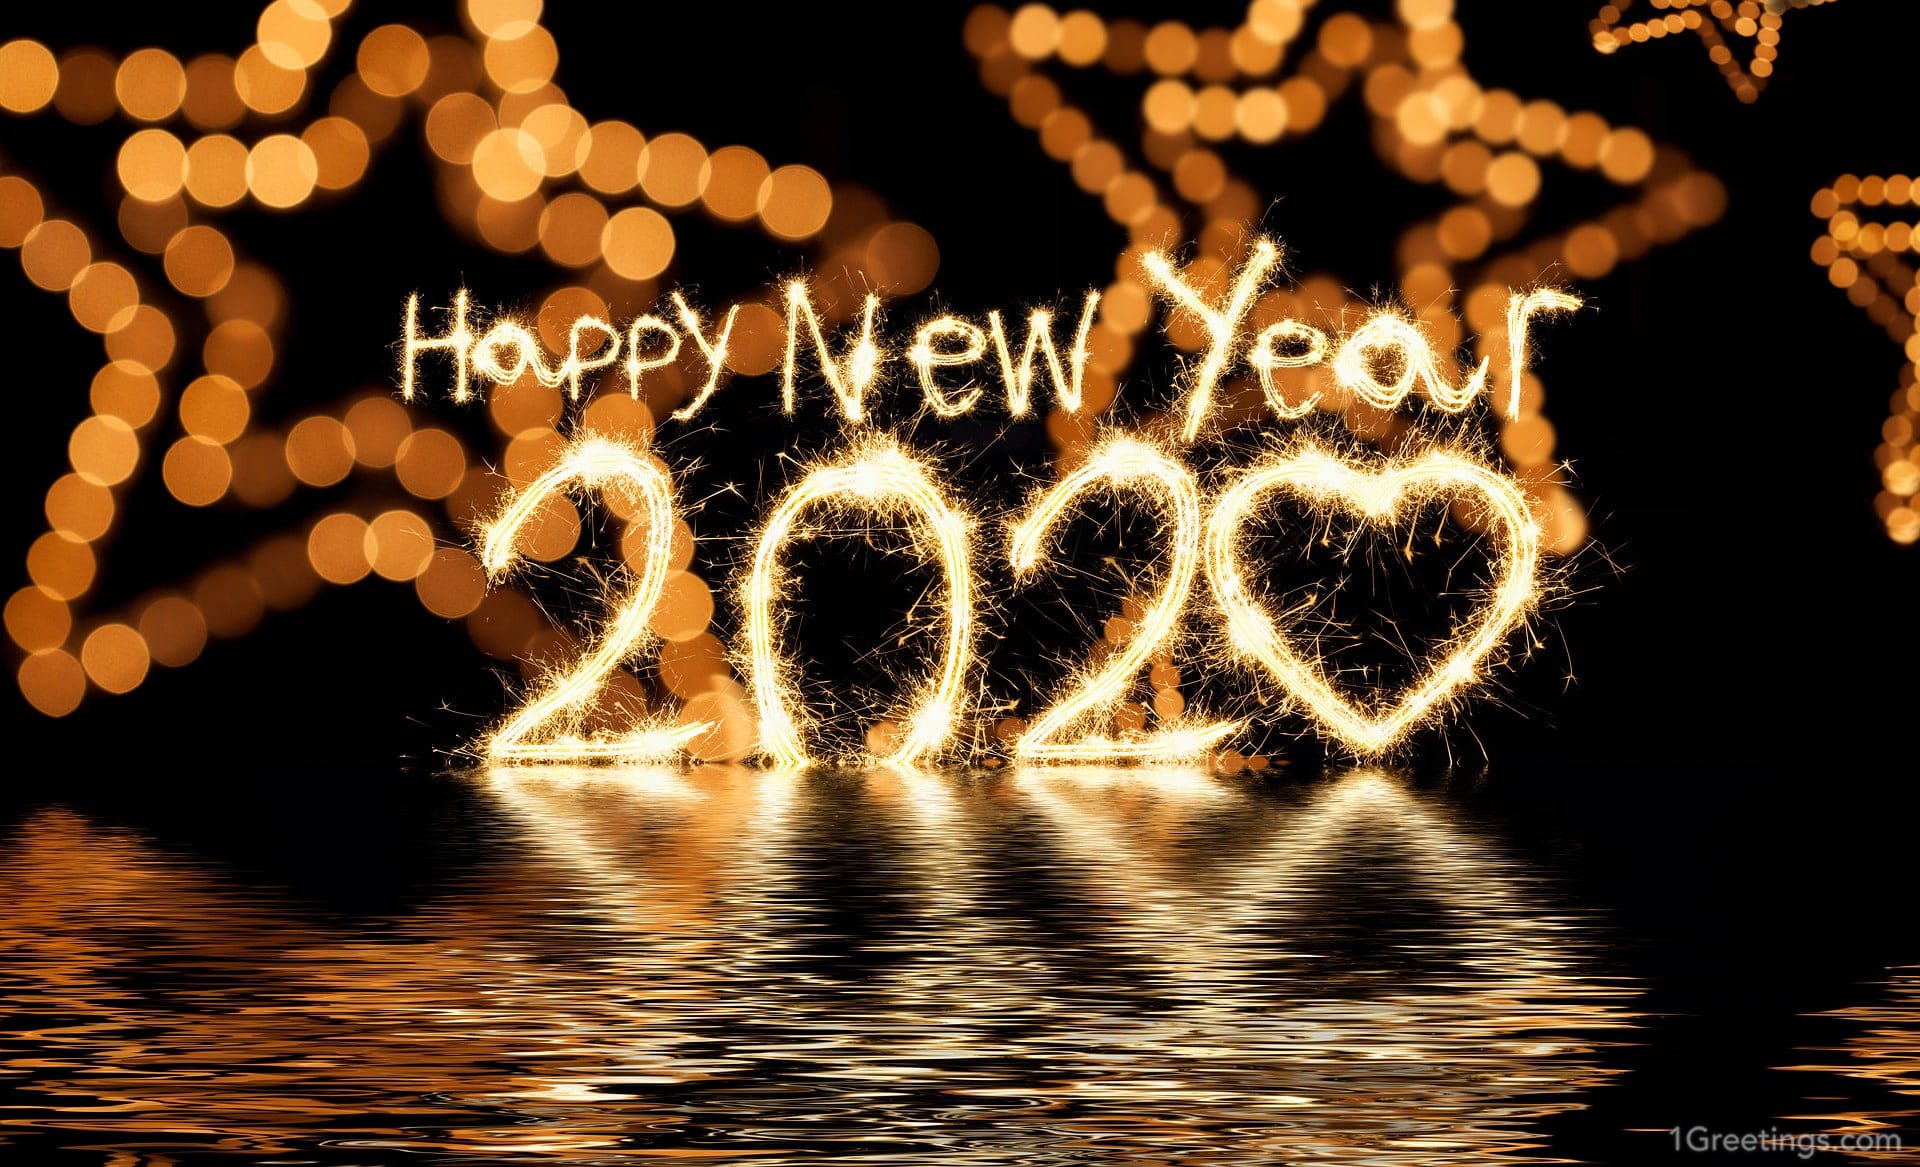 Download happy new year wallpaper 2020 fireworks